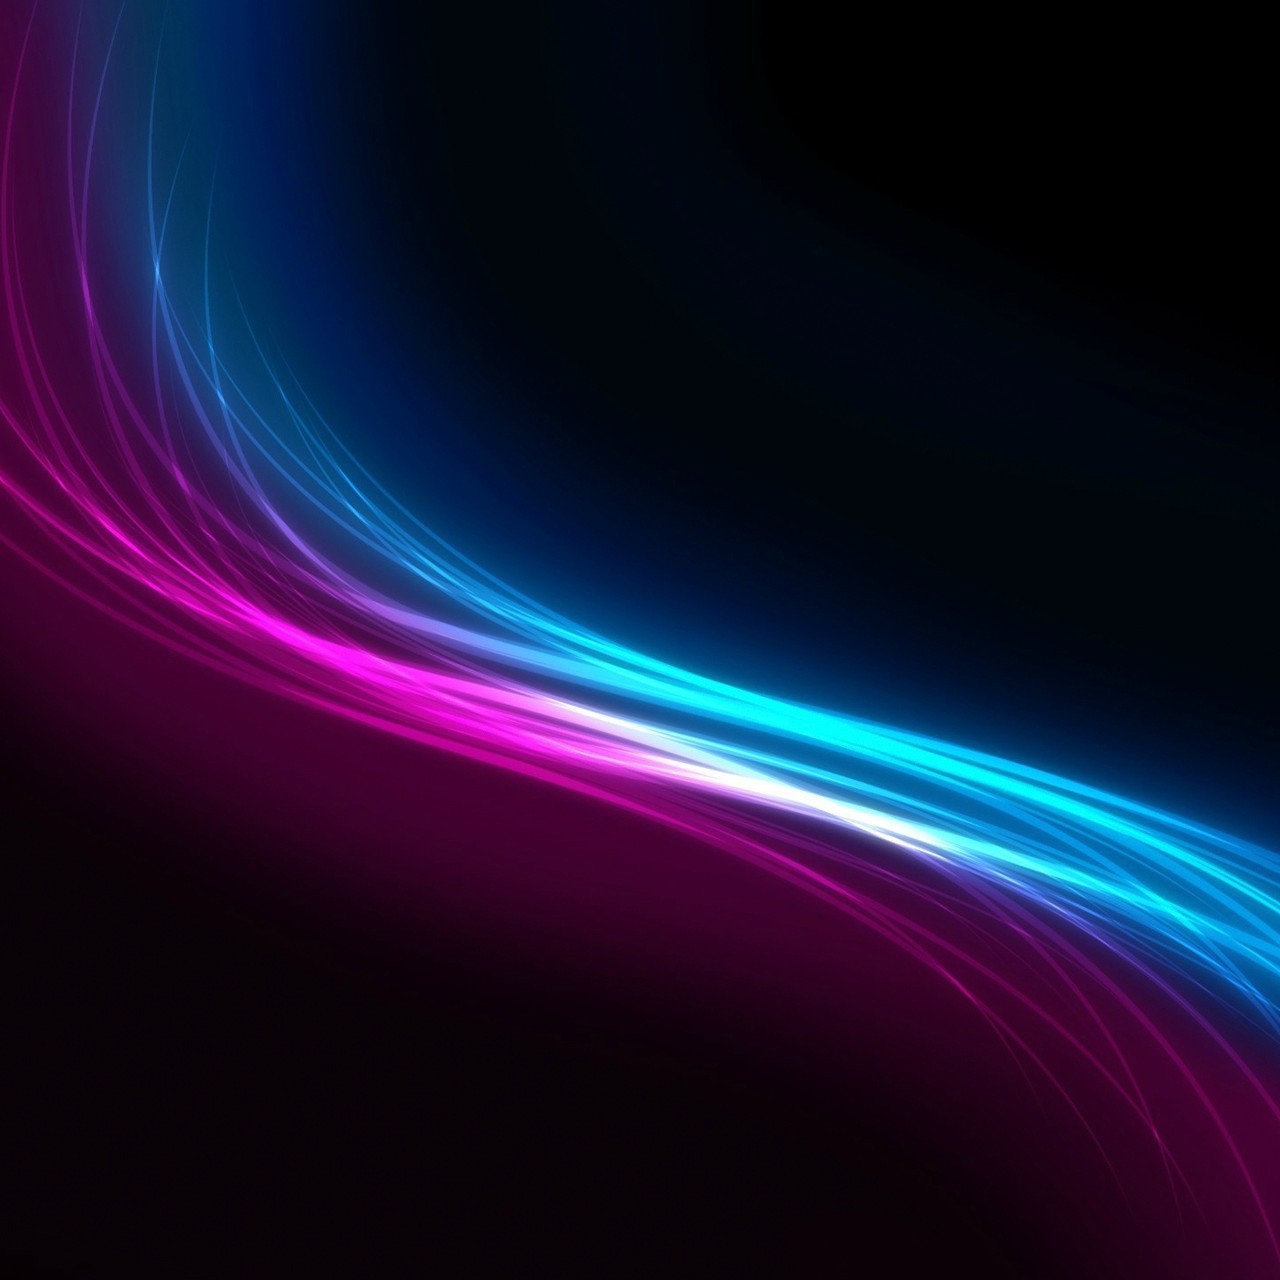 Htc Lock Screen Wallpaper - Android Jelly Bean Stock , HD Wallpaper & Backgrounds